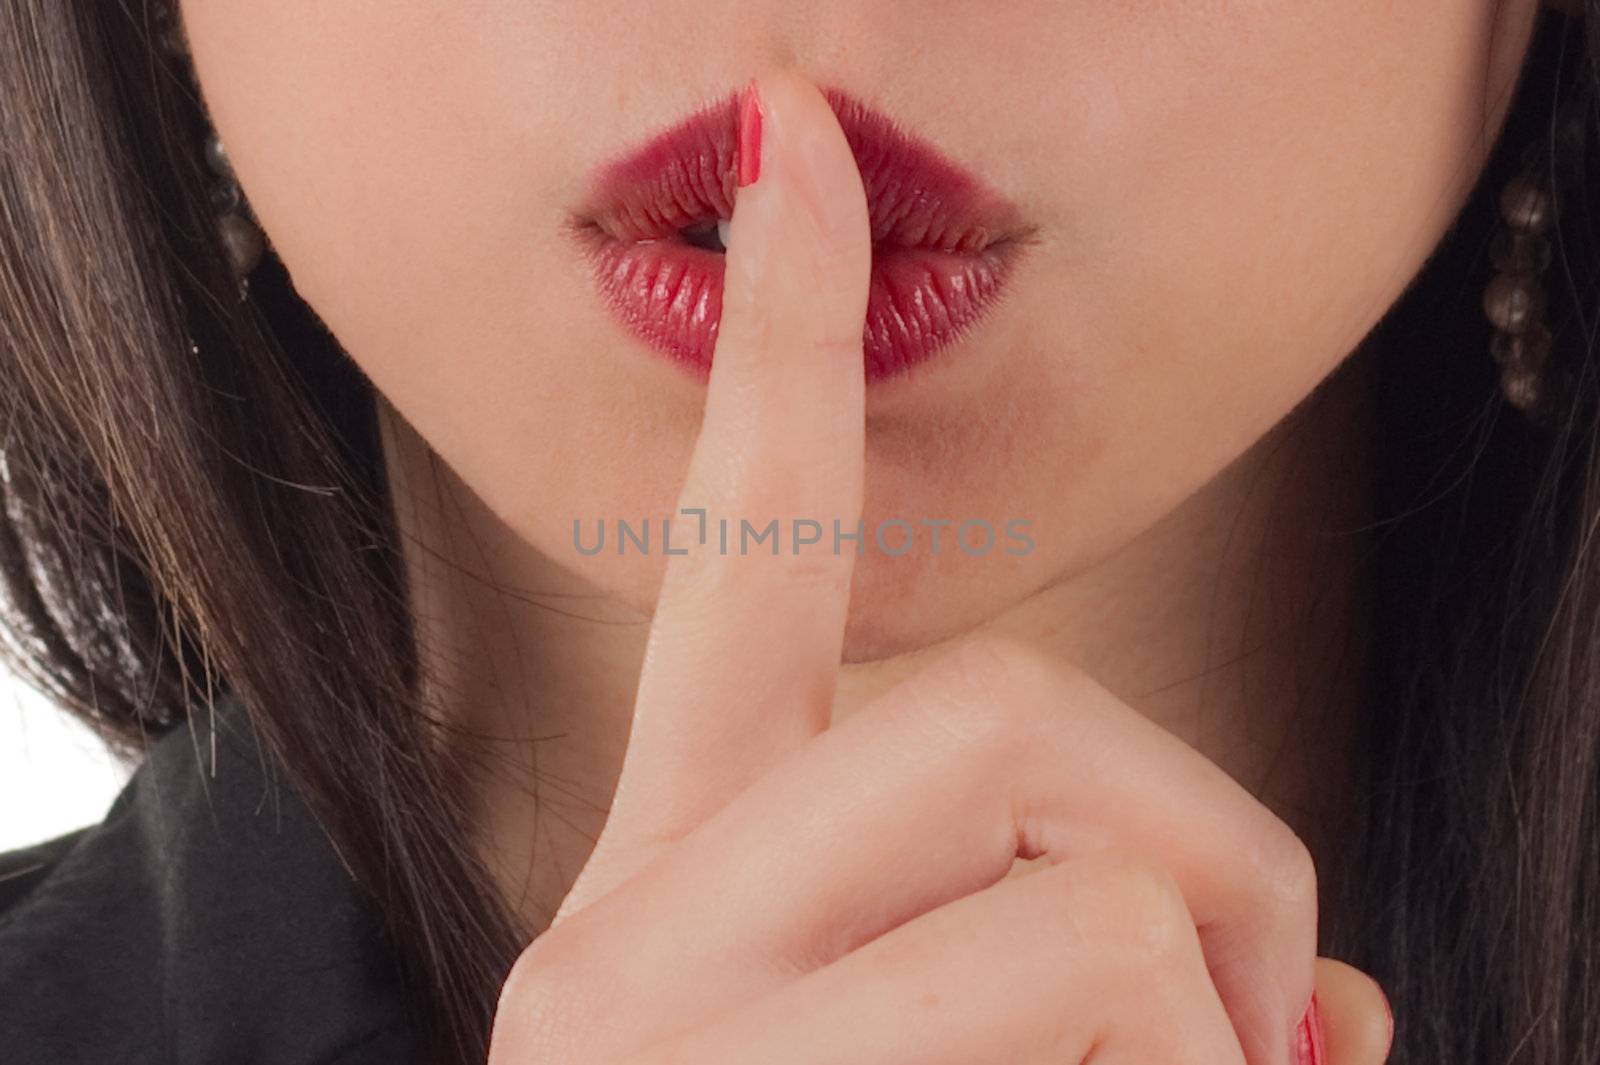 Shhh - Studio shot of beautiful sexy young woman with finger to lips